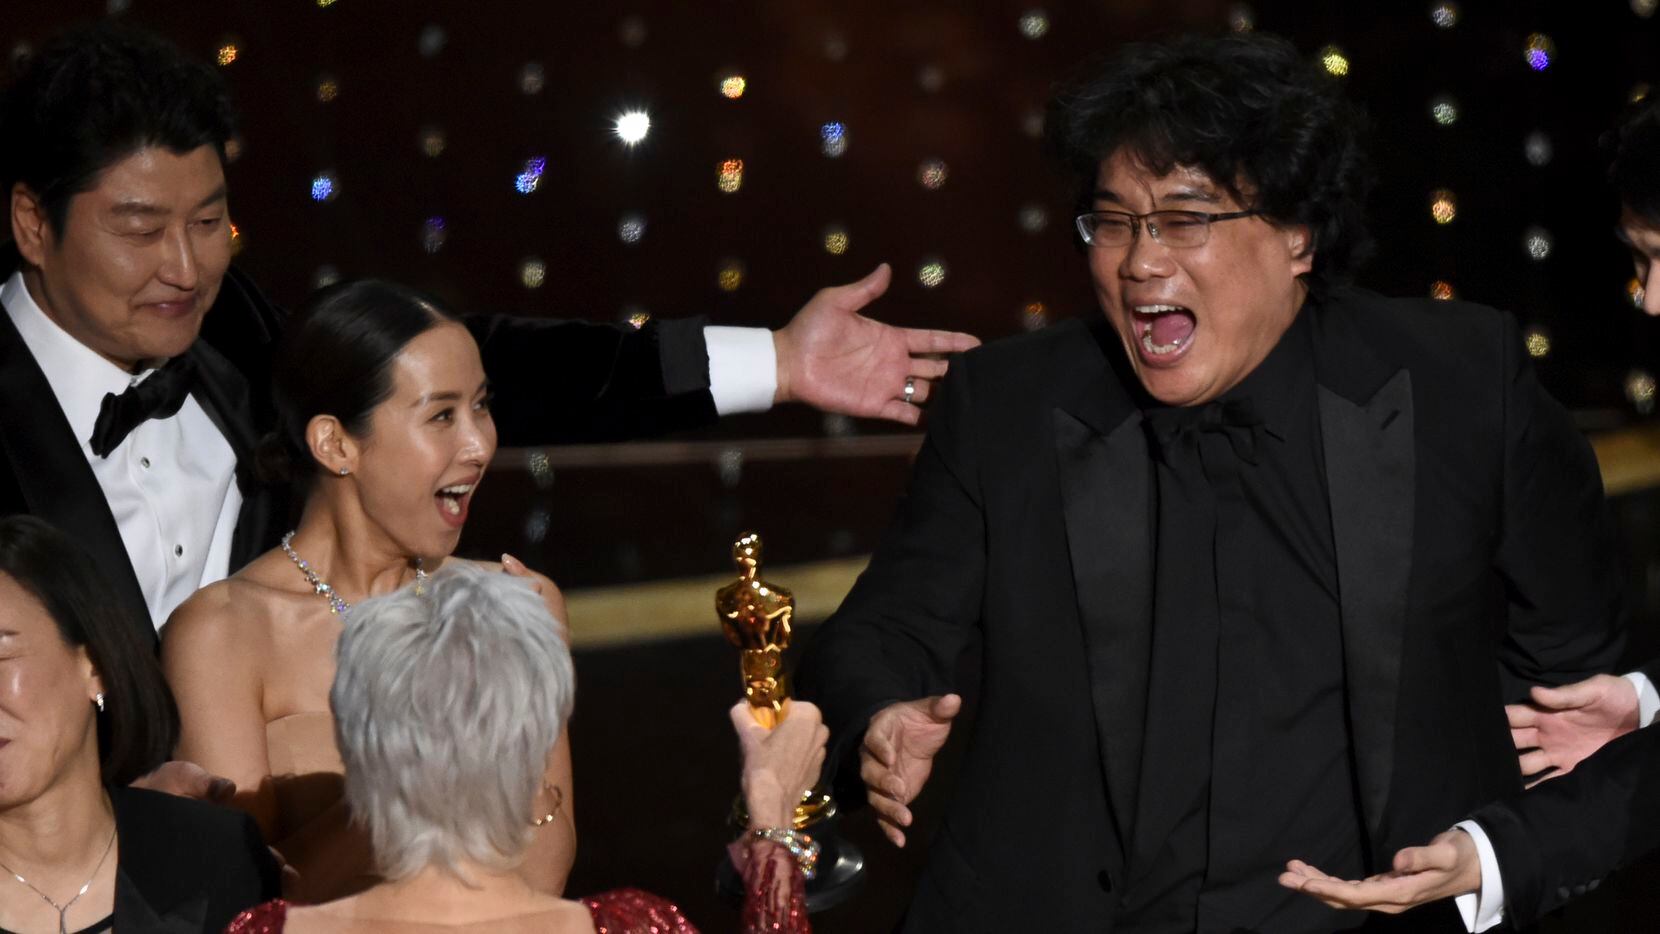 Bong Joon-ho, right, reacts as he is presented with the award for best picture for "Parasite" from presenter Jane Fonda at the Oscars on Sunday, Feb. 9, 2020, at the Dolby Theatre in Los Angeles. Looking on from left are Kang-Ho Song and Kwak Sin Ae.